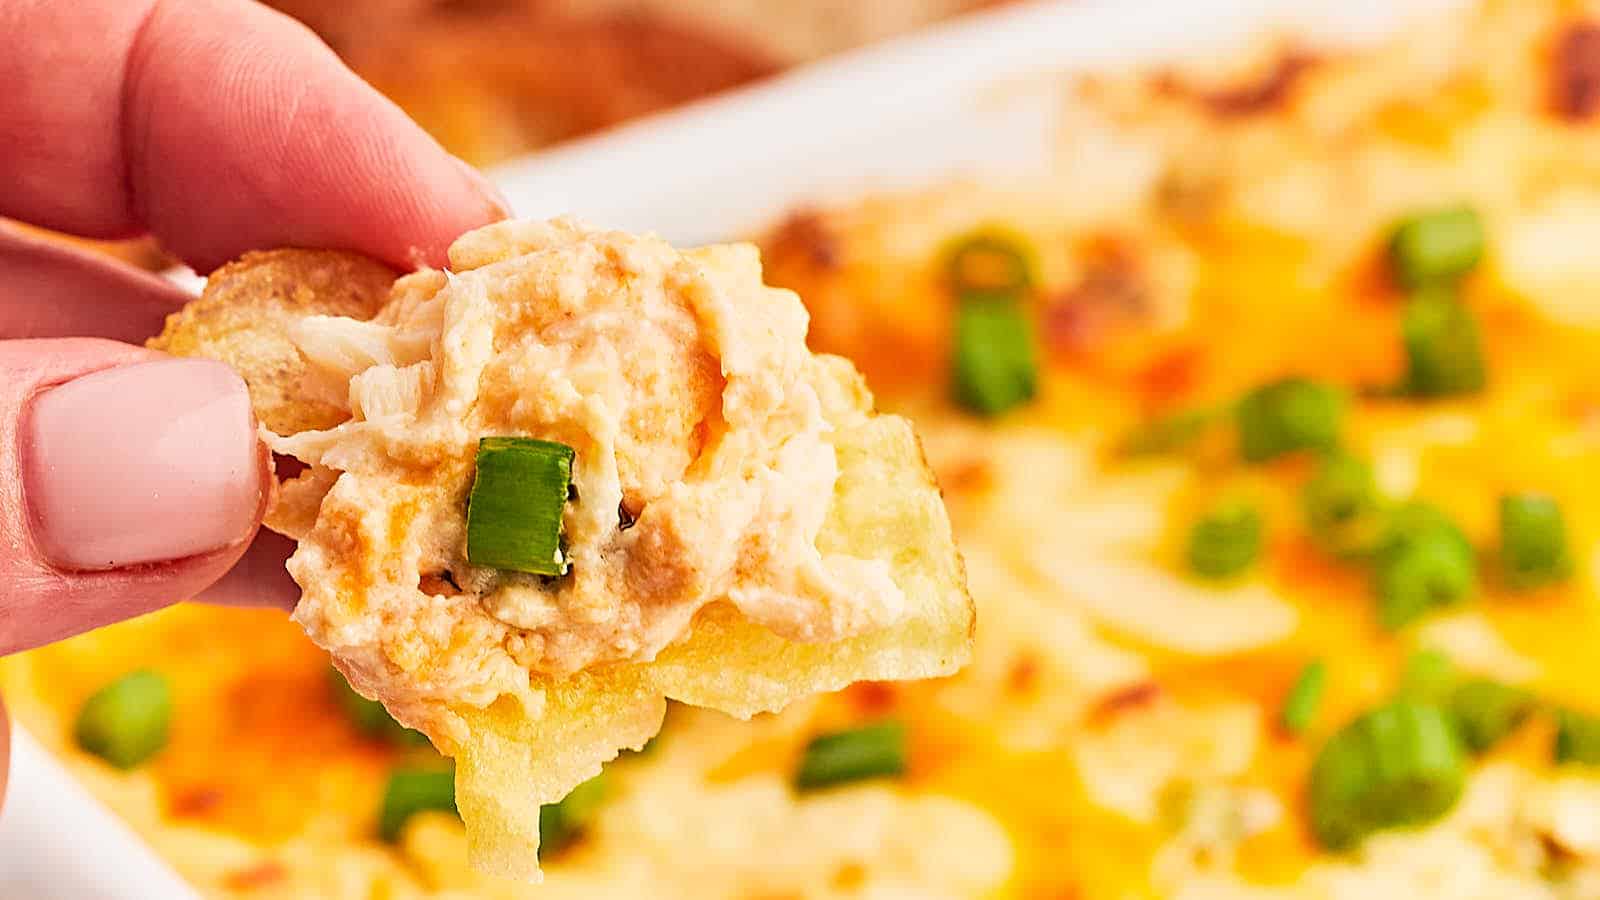 Warm Crab Dip recipe by Cheerful Cook.